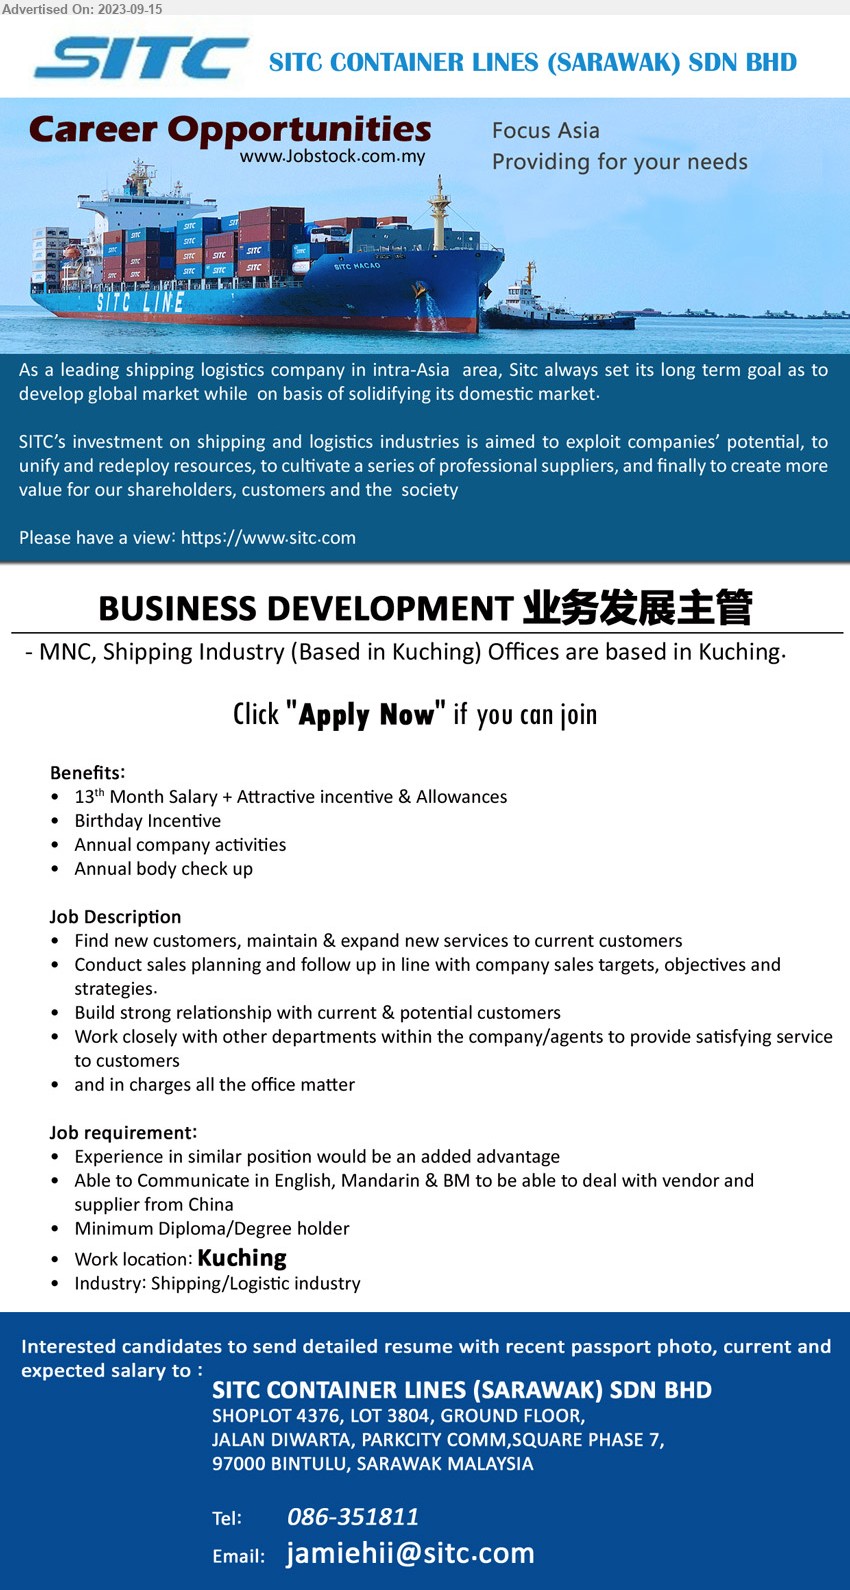 SITC CONTAINER LINES (SARAWAK) SDN BHD - BUSINESS DEVELOPMENT 业务发展主管  (Kuching), Diploma/Degree holder, Able to Communicate in English, Mandarin & BM to be able to deal with vendor and supplier from China,...
Call 086-351811 / Email resume to ...
